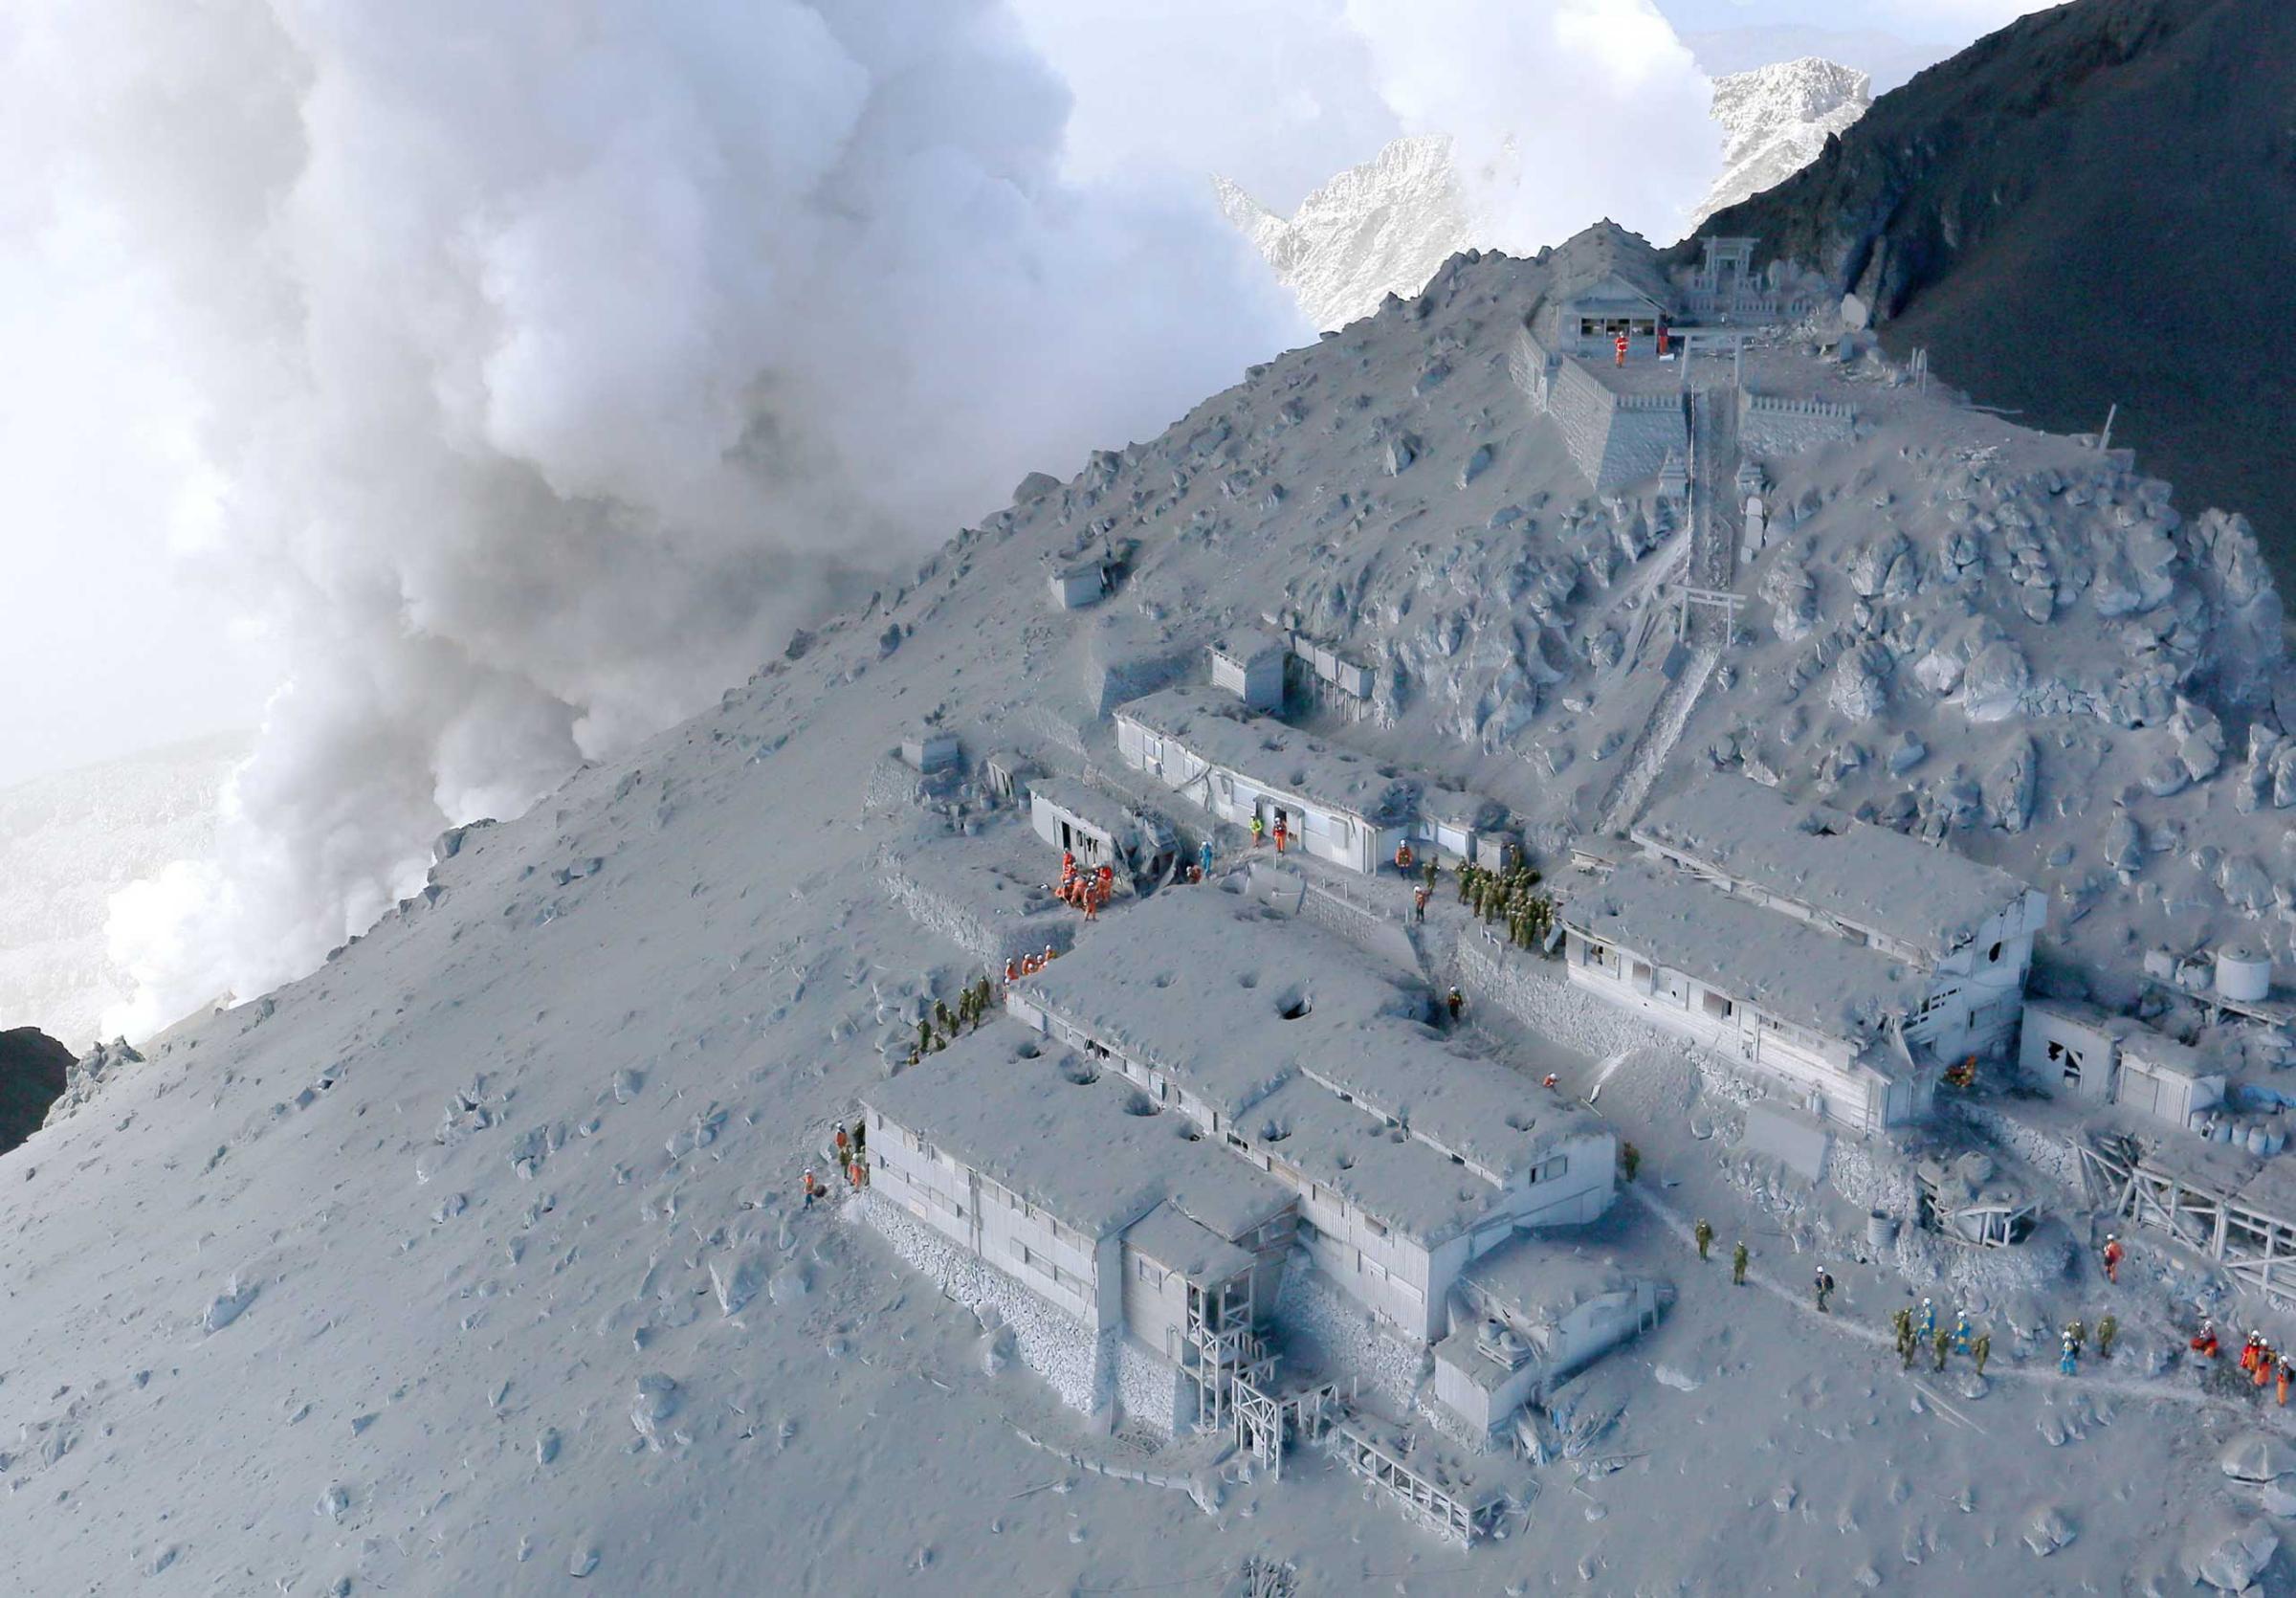 Mountain lodges near the top of Mt. Ontake in Tokyo, Japan are covered in volcano ash, Sept. 28, 2014.